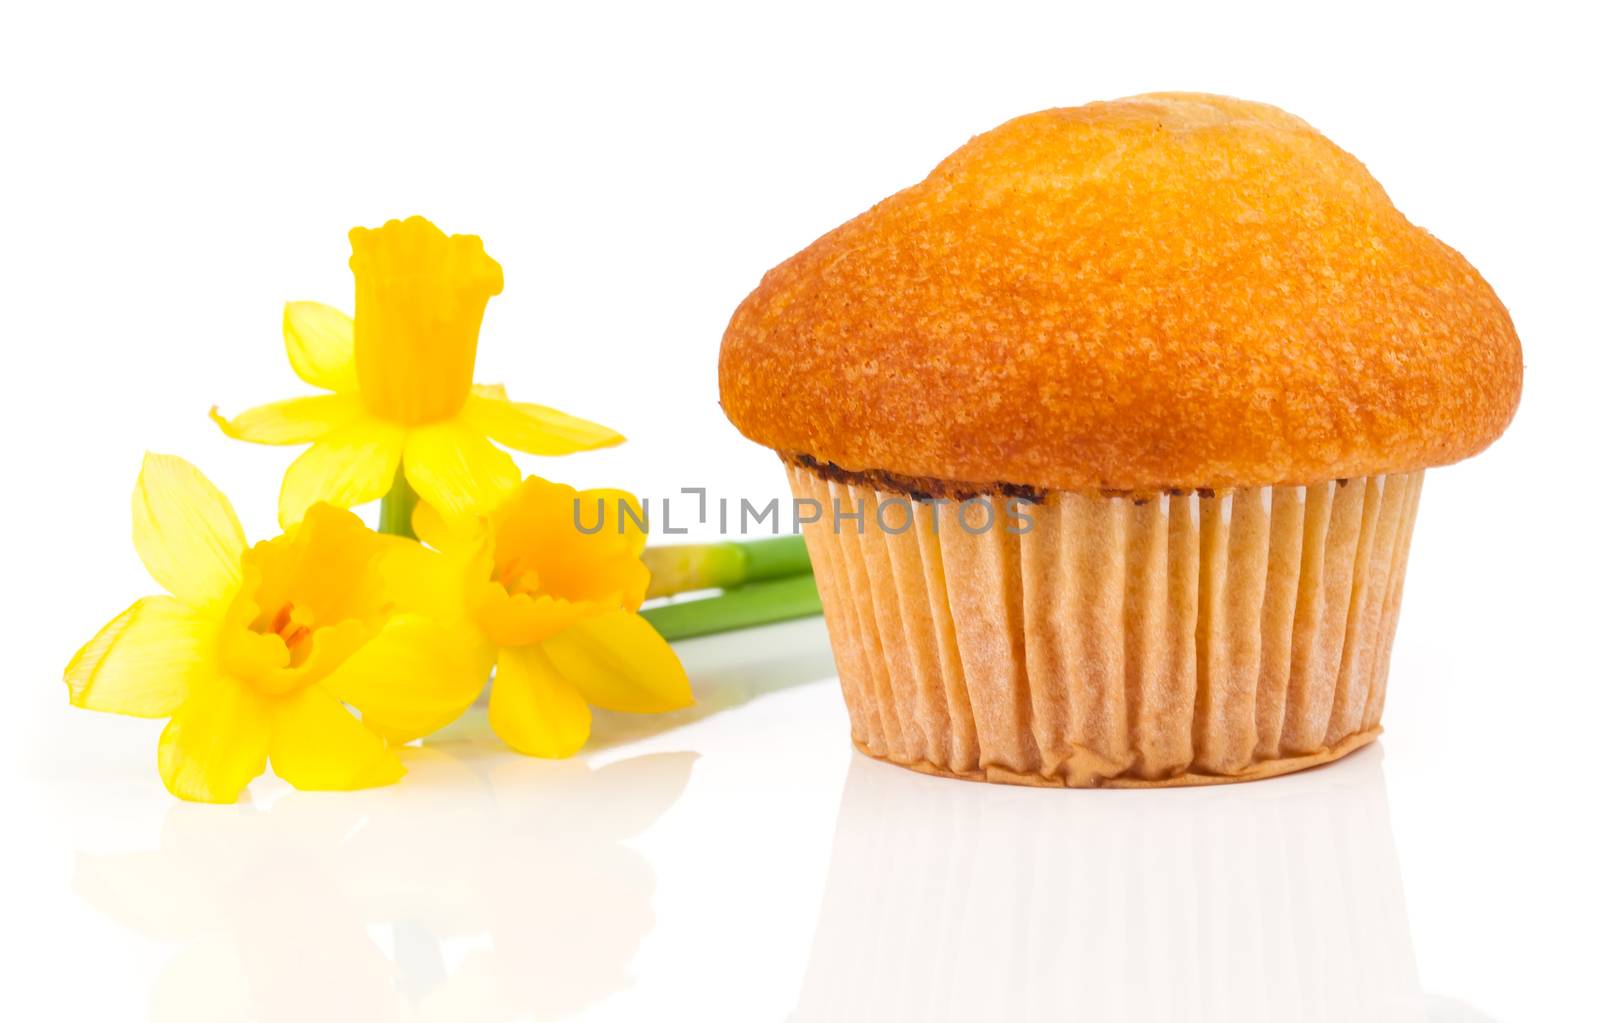 muffins, isolated on white background